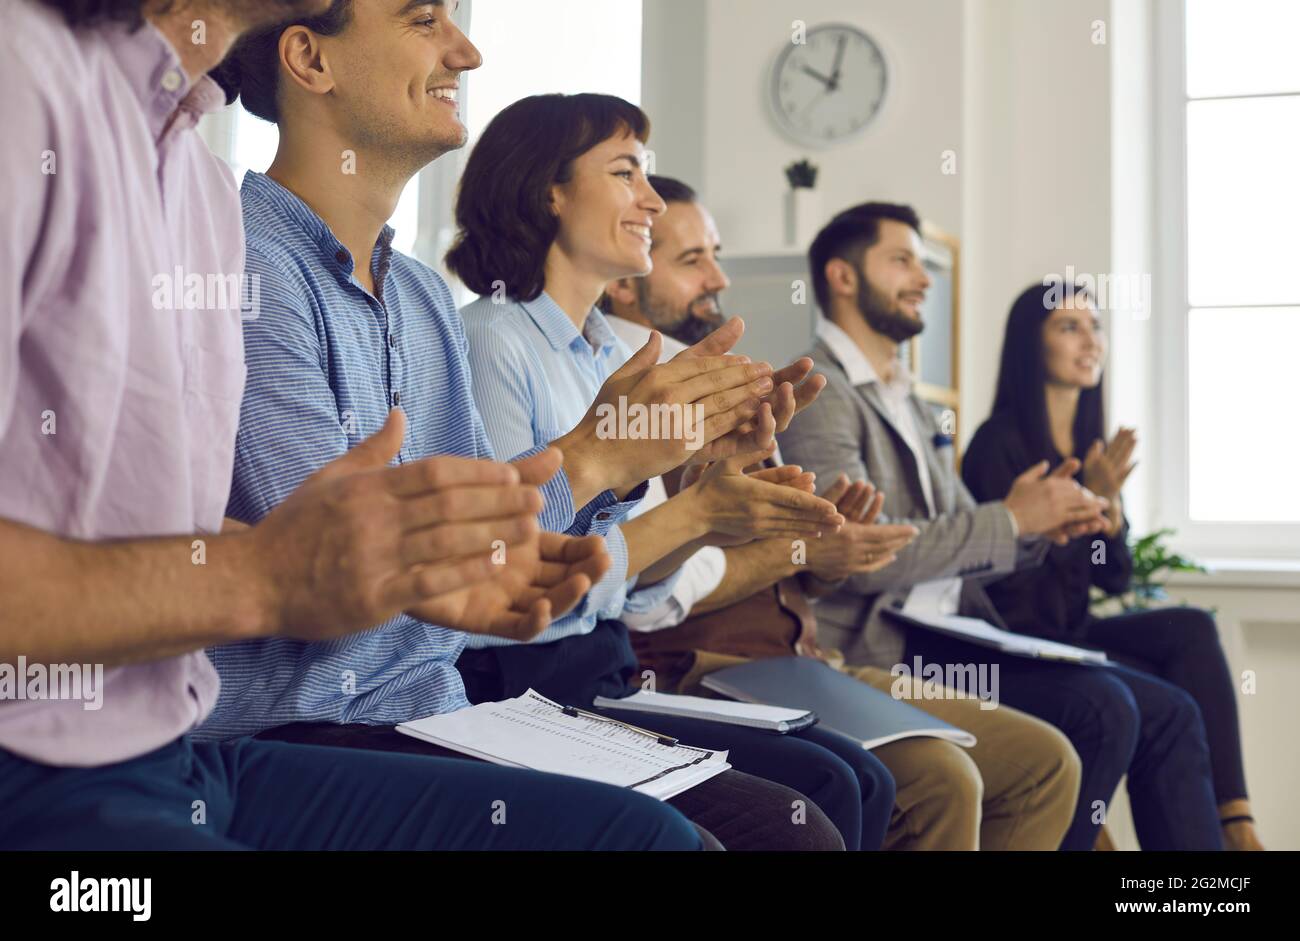 A group of young satisfied people colleagues feel happy in training Stock Photo